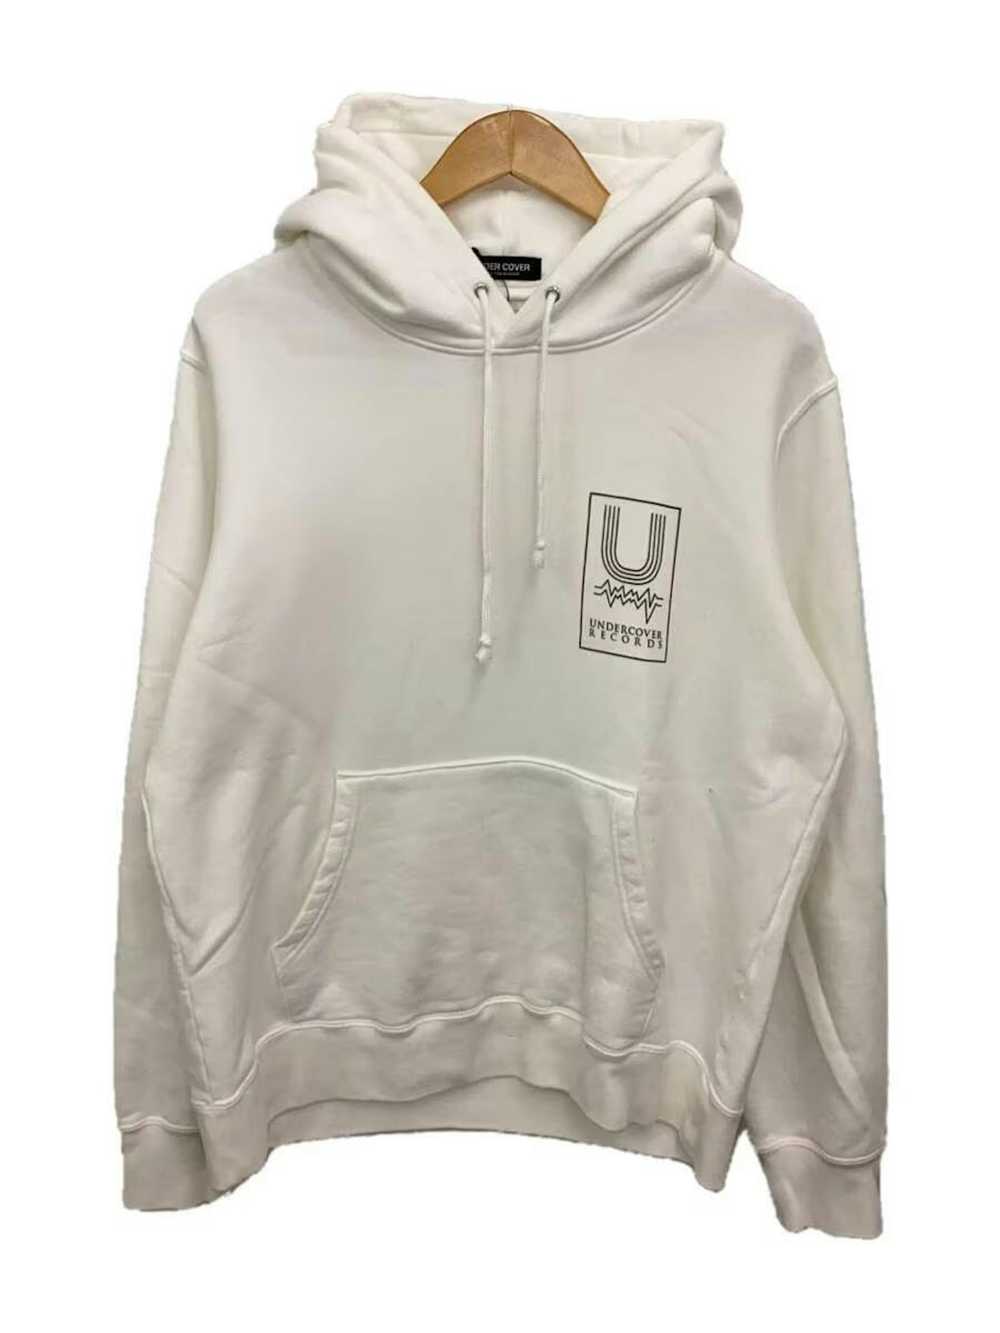 Undercover Record Label Logo Hoodie - image 1